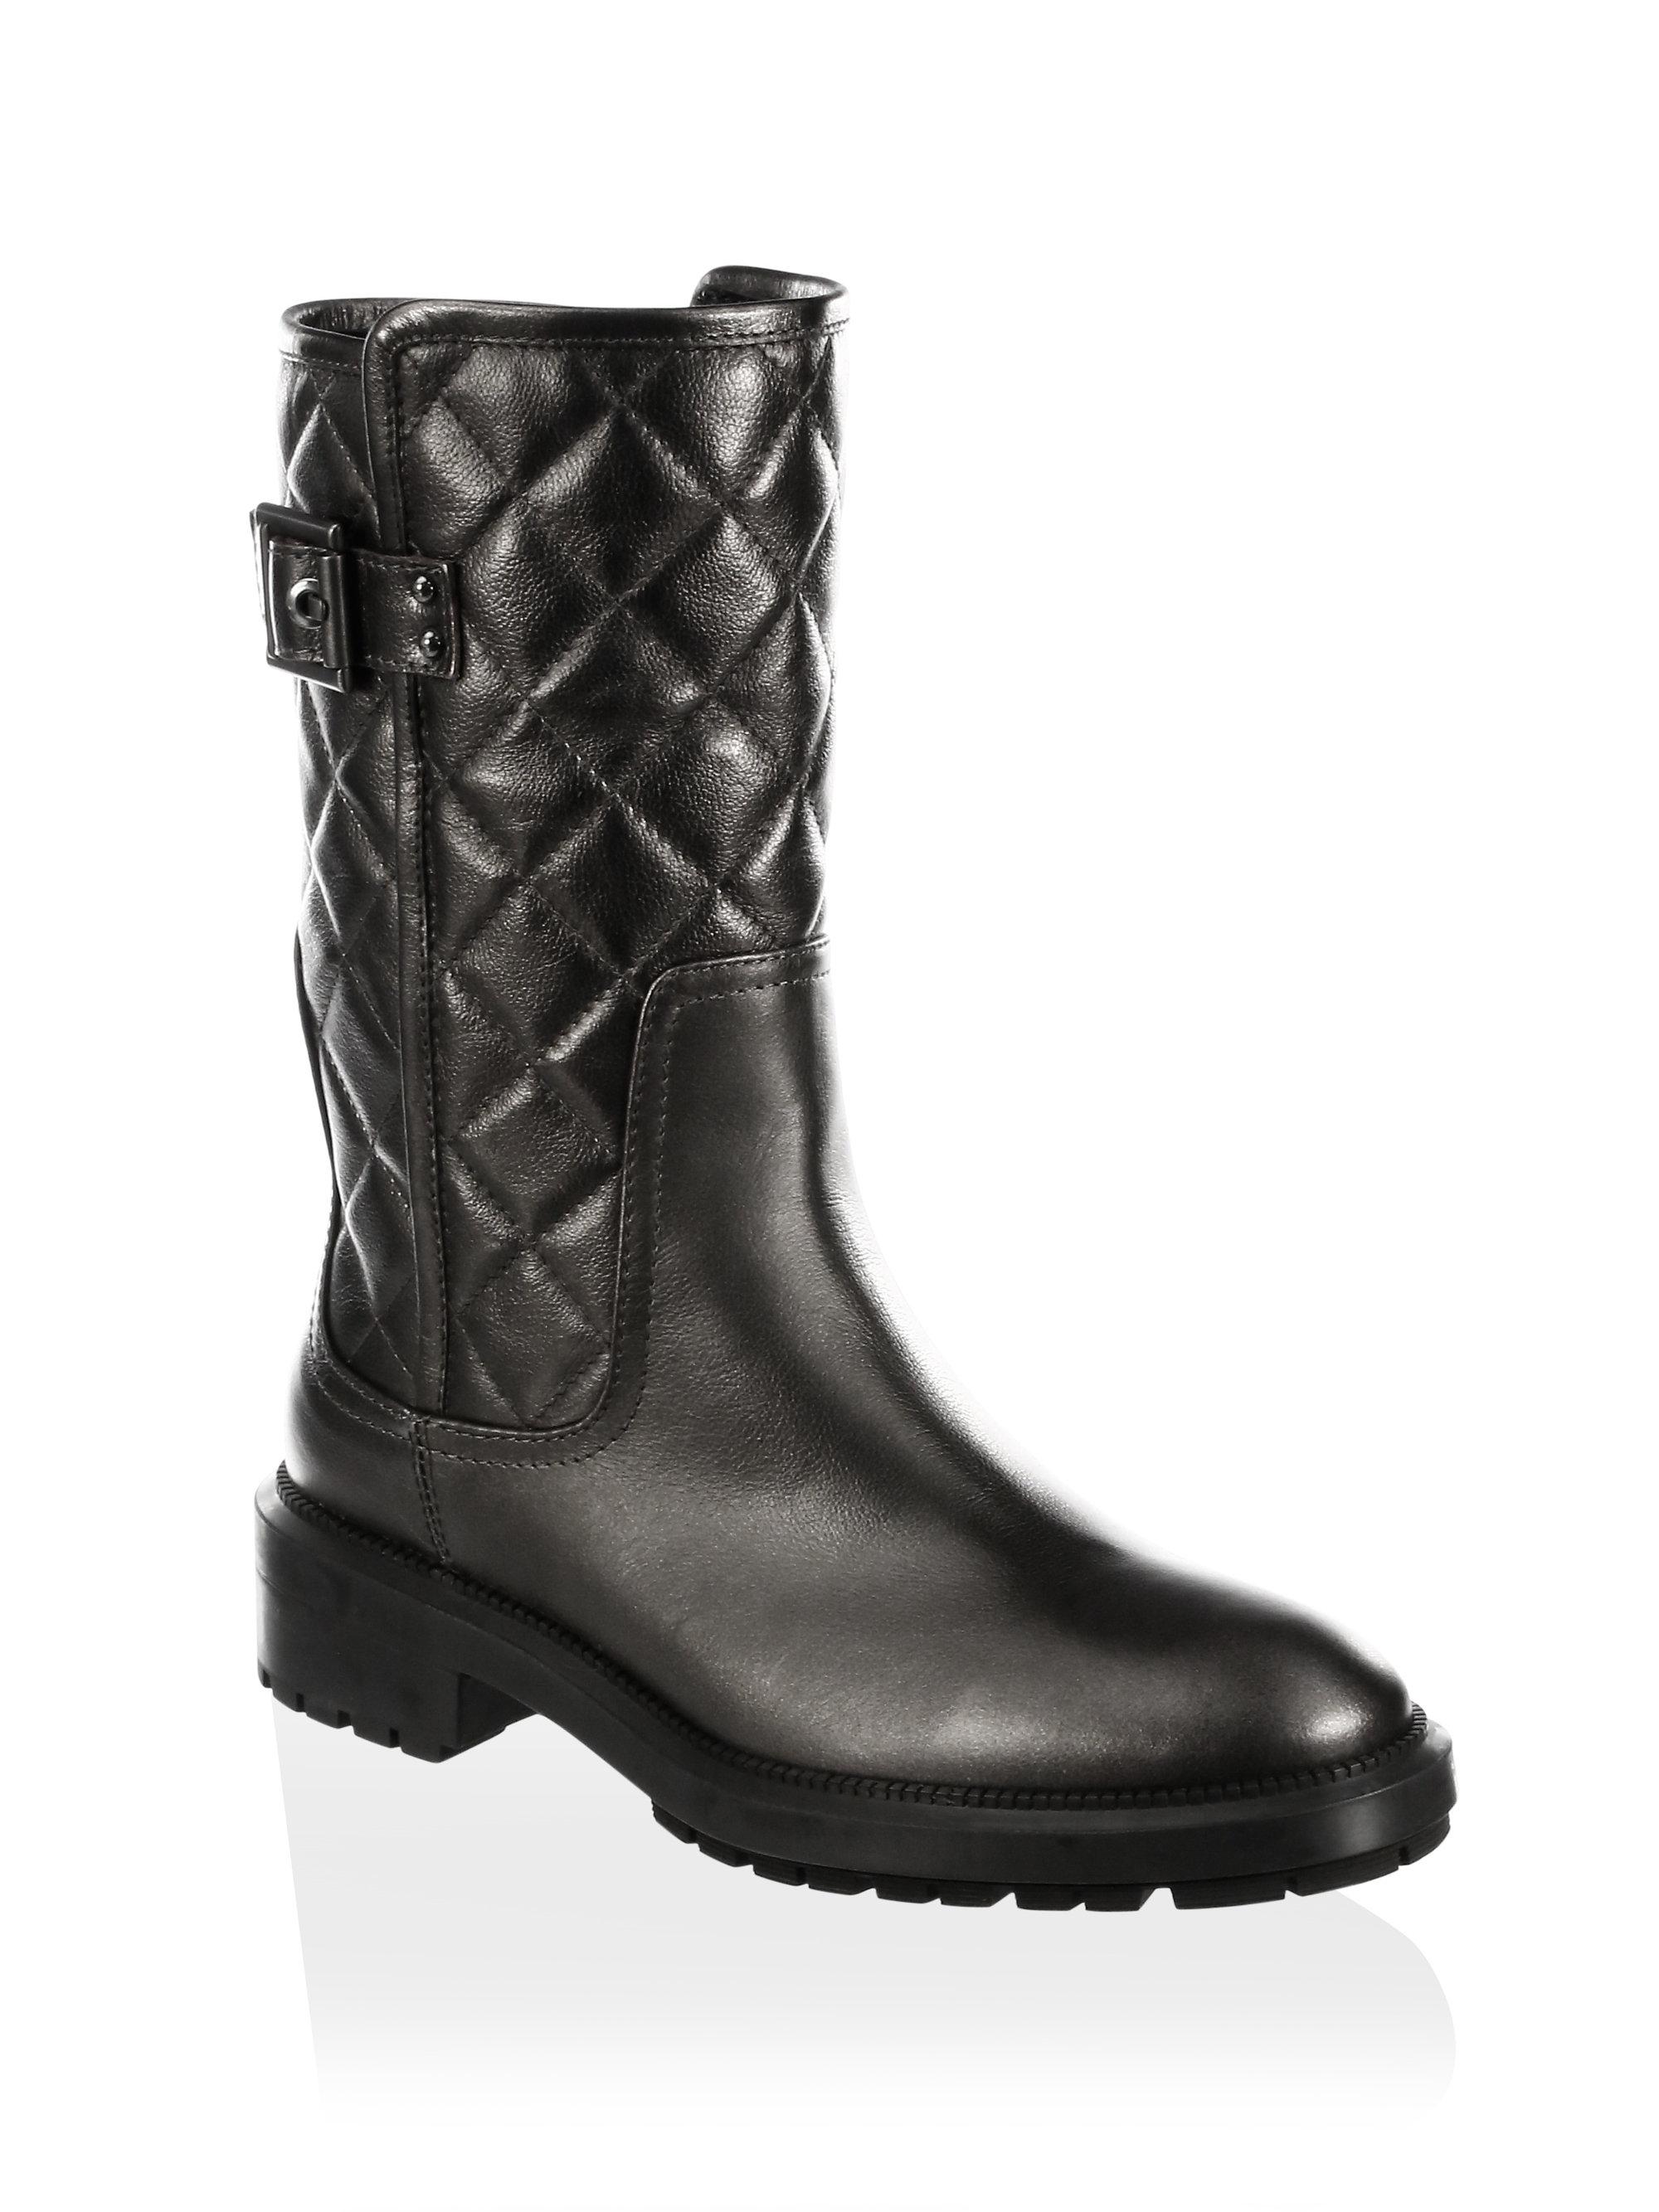 Aquatalia Layla Quilted Leather Boots 